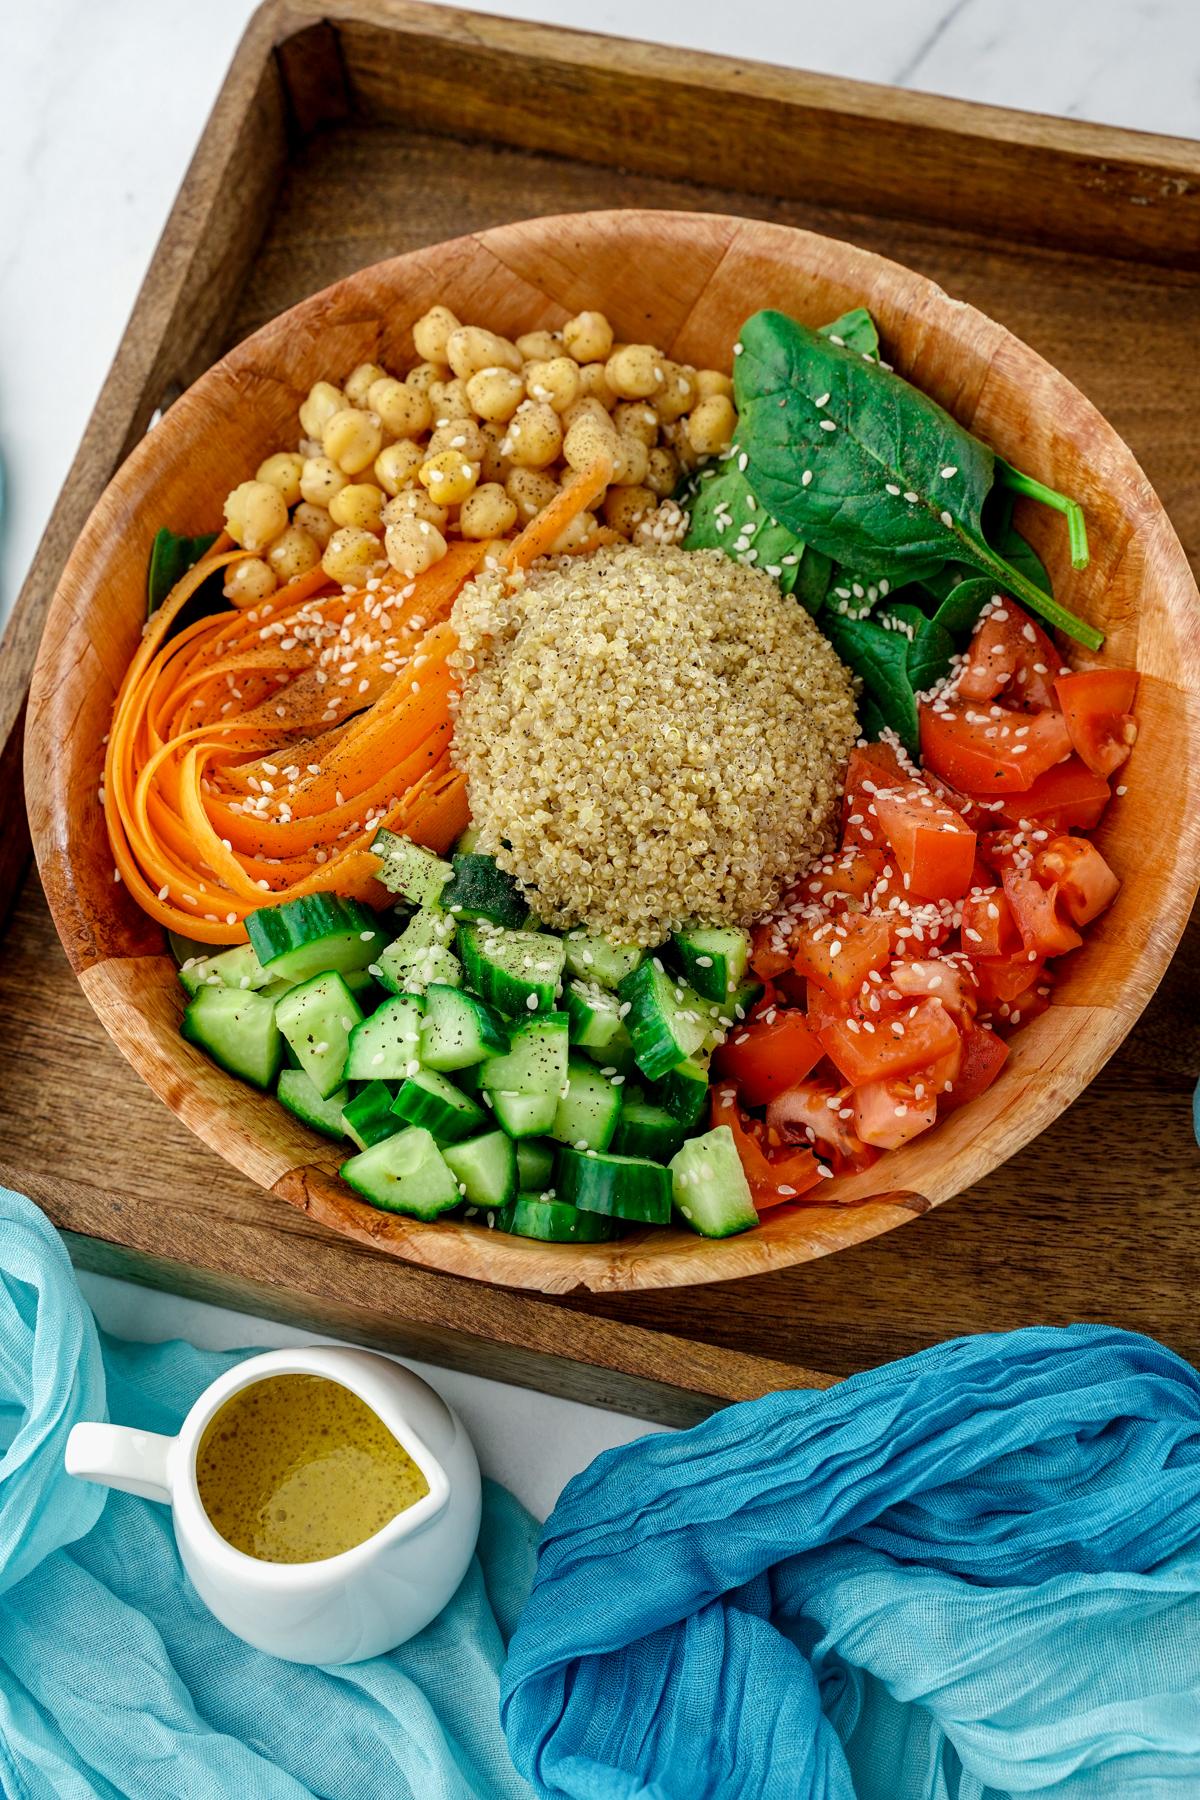 wooden bowl of rainbow salad sitting on wood tray by teal napkin